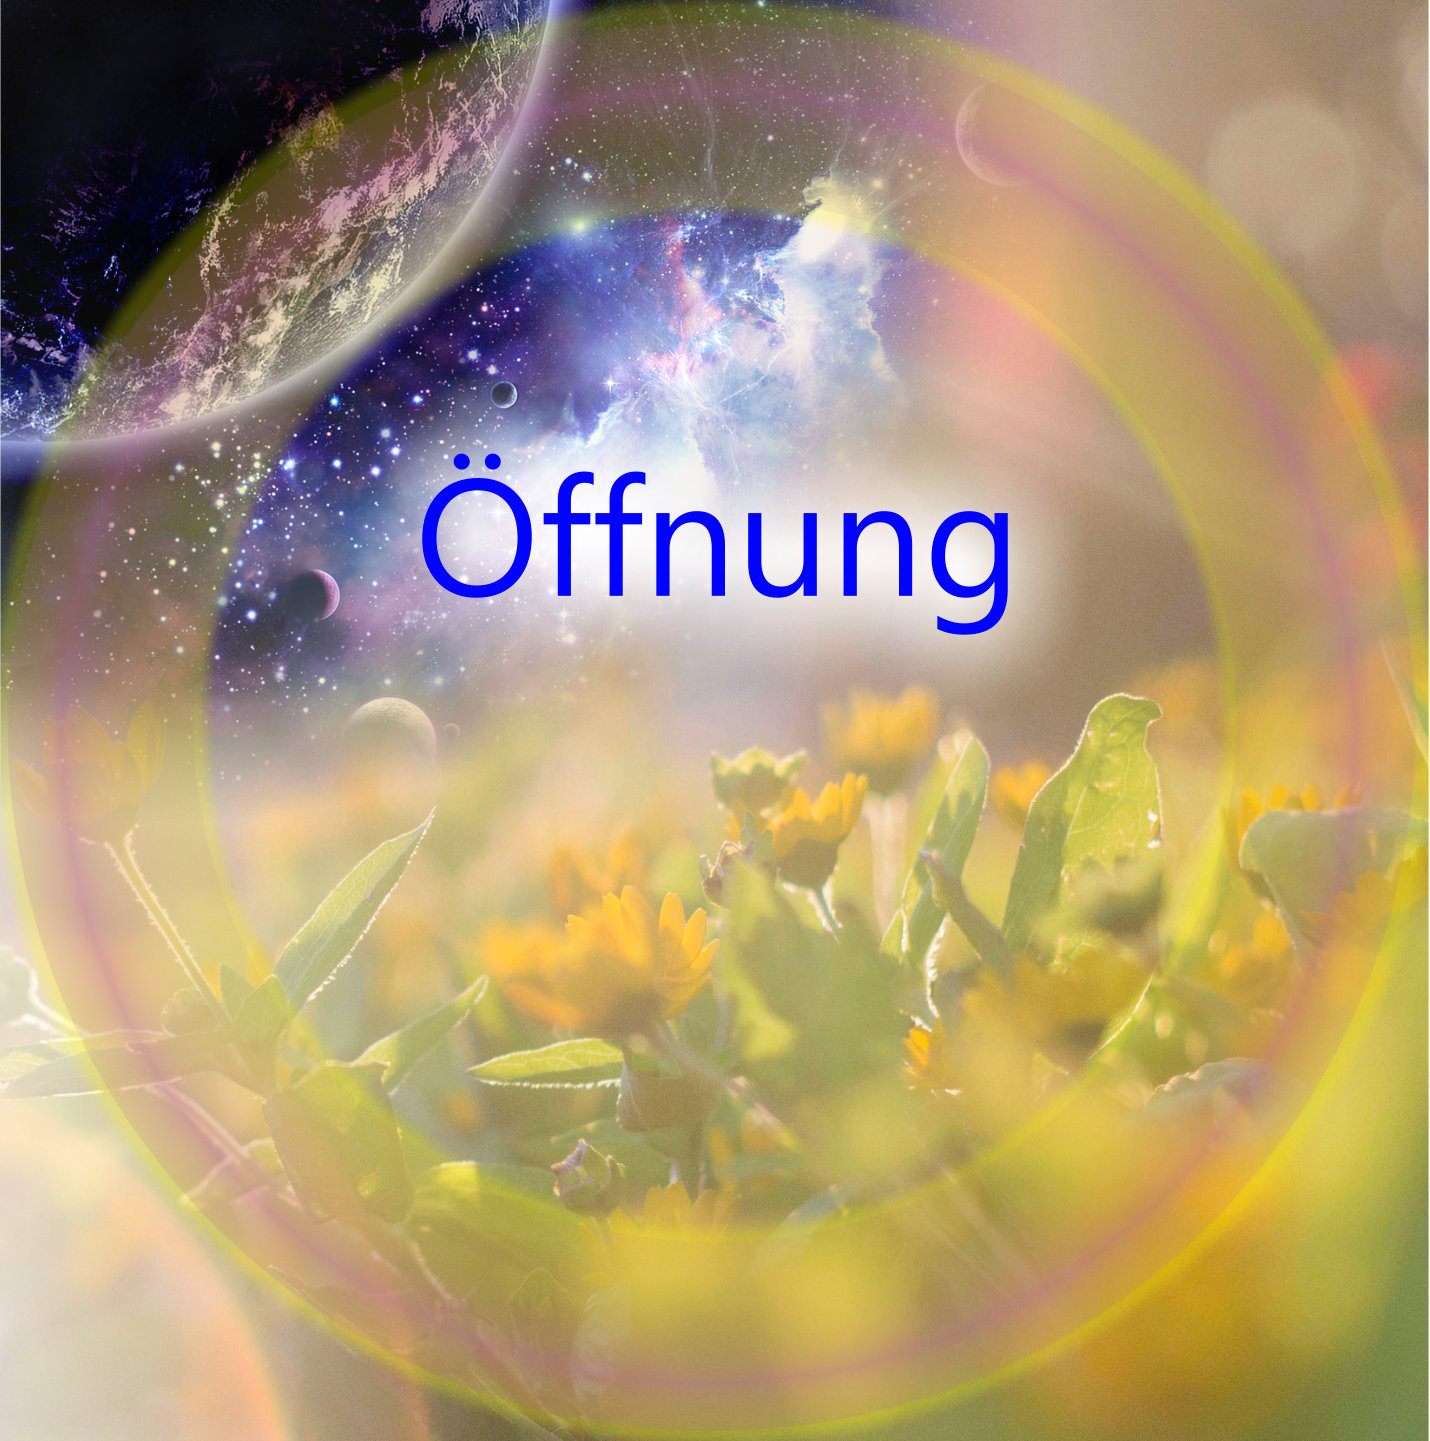 CD-Cover Öffnung front